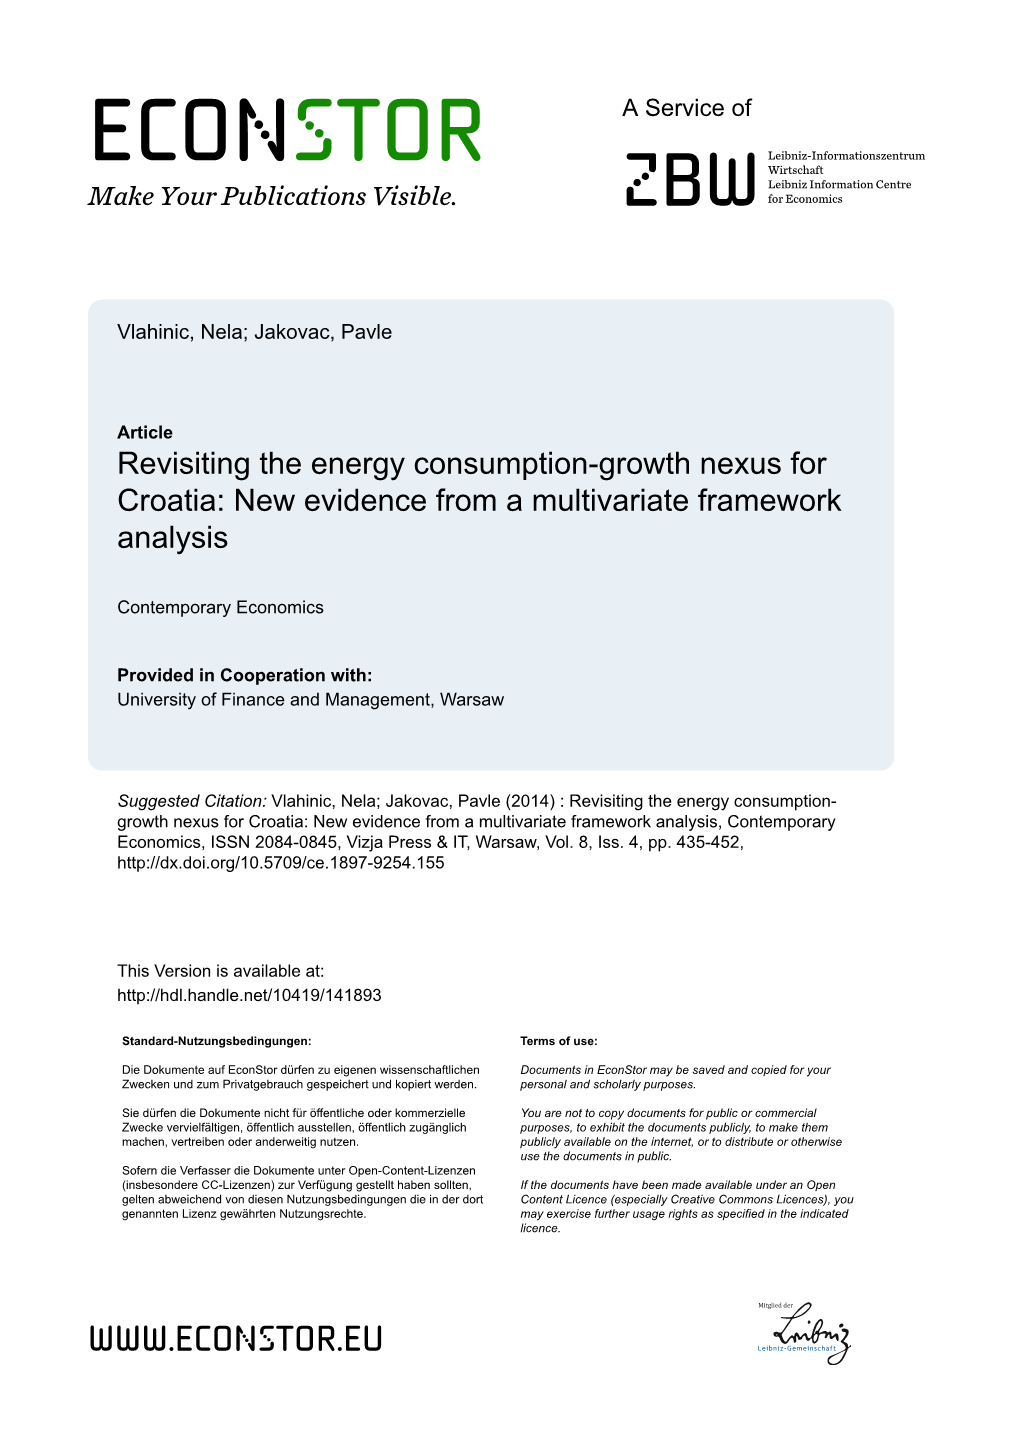 Revisiting the Energy Consumption-Growth Nexus for Croatia: New Evidence from a Multivariate Framework Analysis